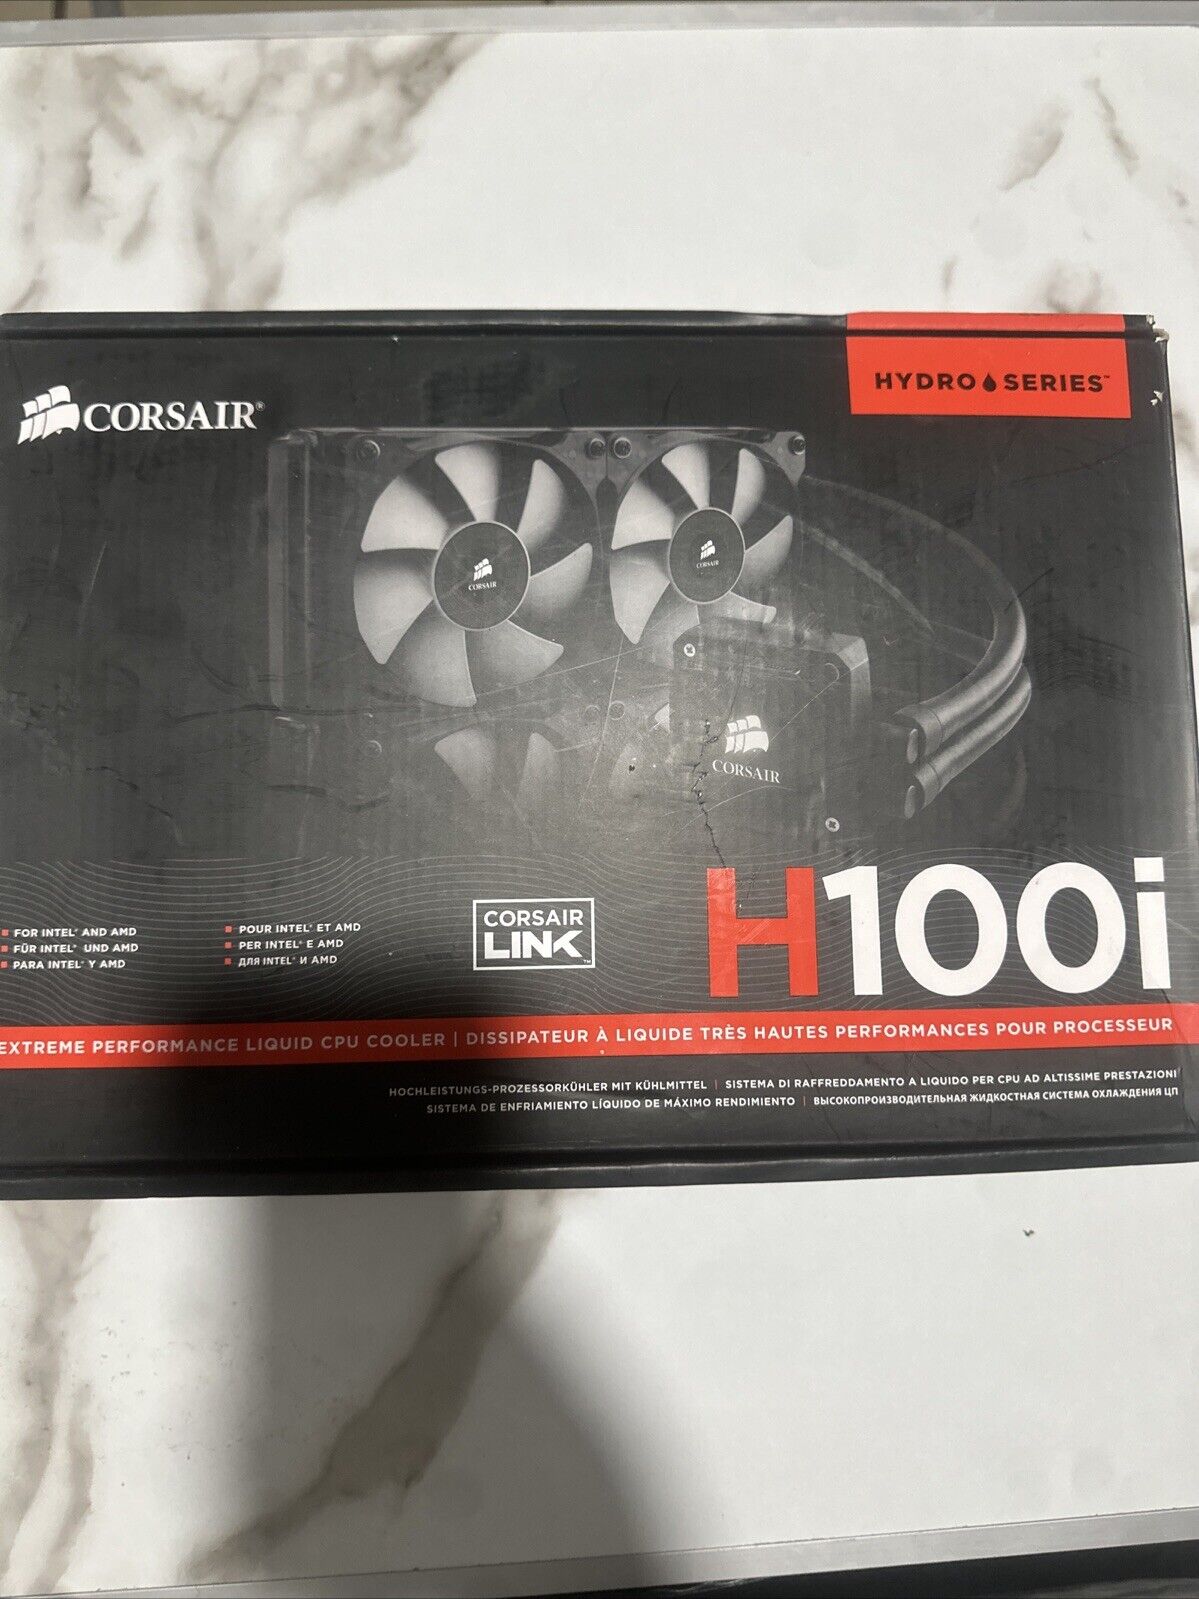 Corsair Hydro Series Extreme Performance Liquid CPU Cooler H100i Case Cooling...